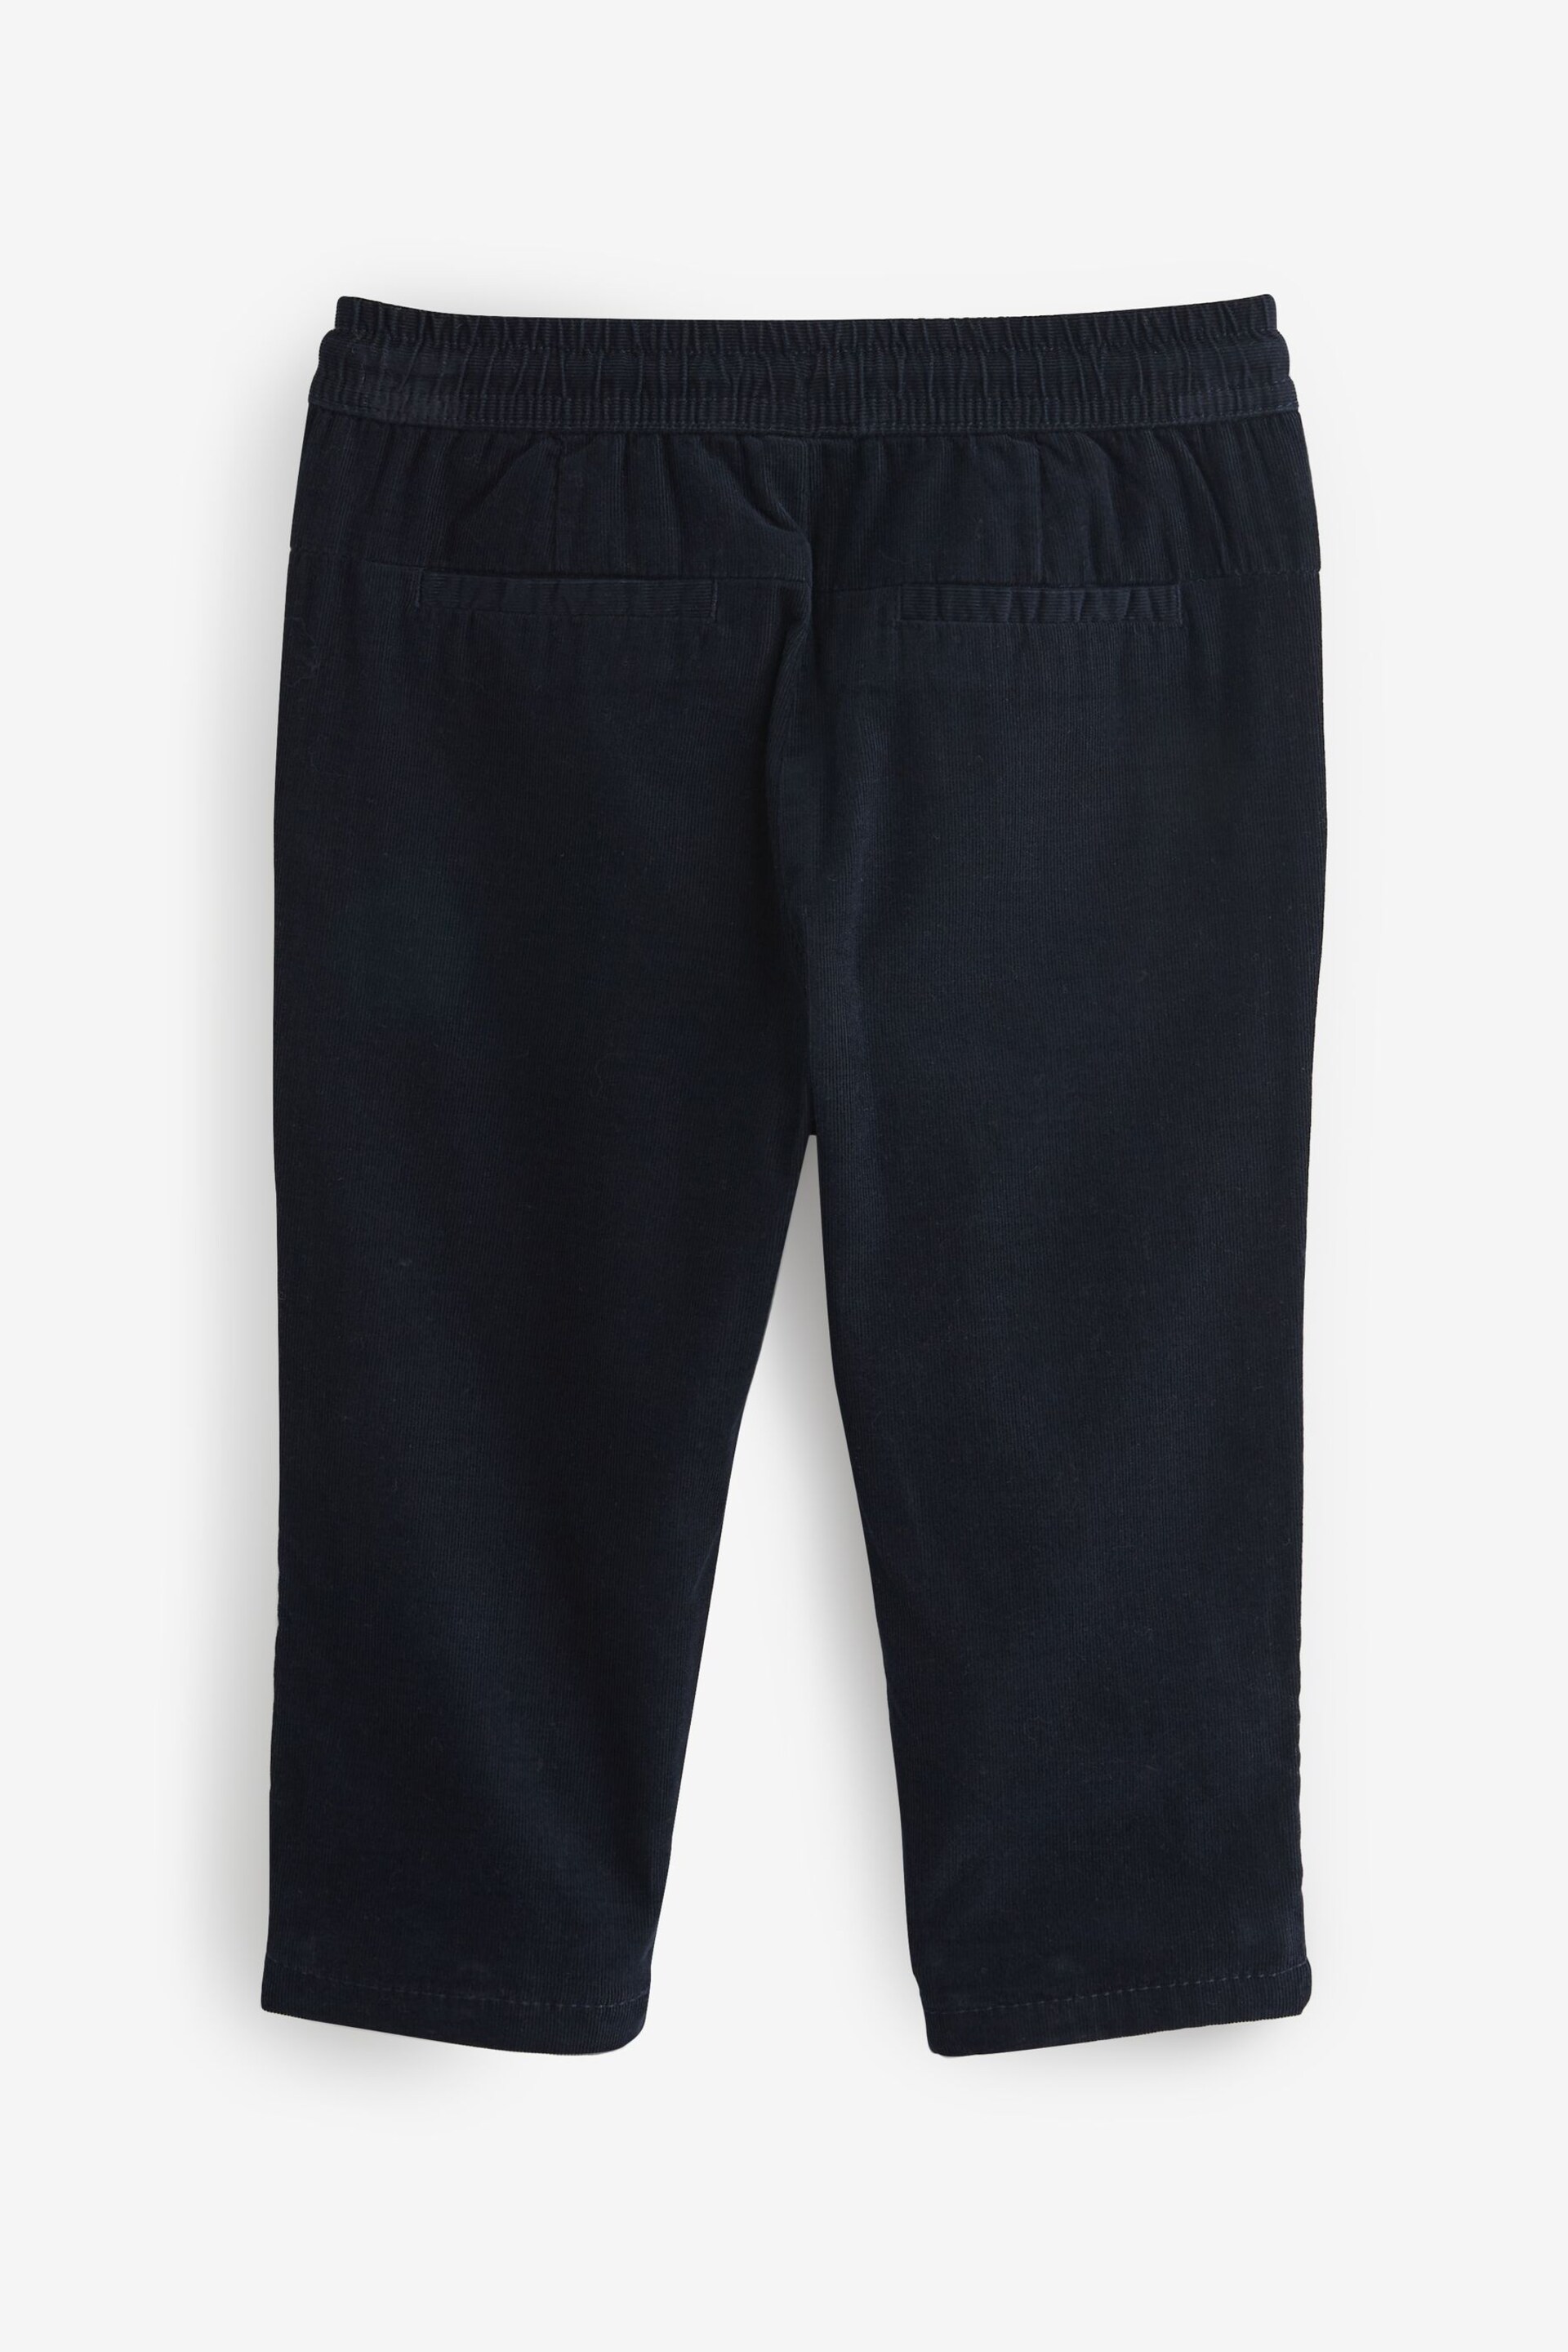 Navy Blue Corduroy Pull-On Trousers (3mths-7yrs) - Image 5 of 6